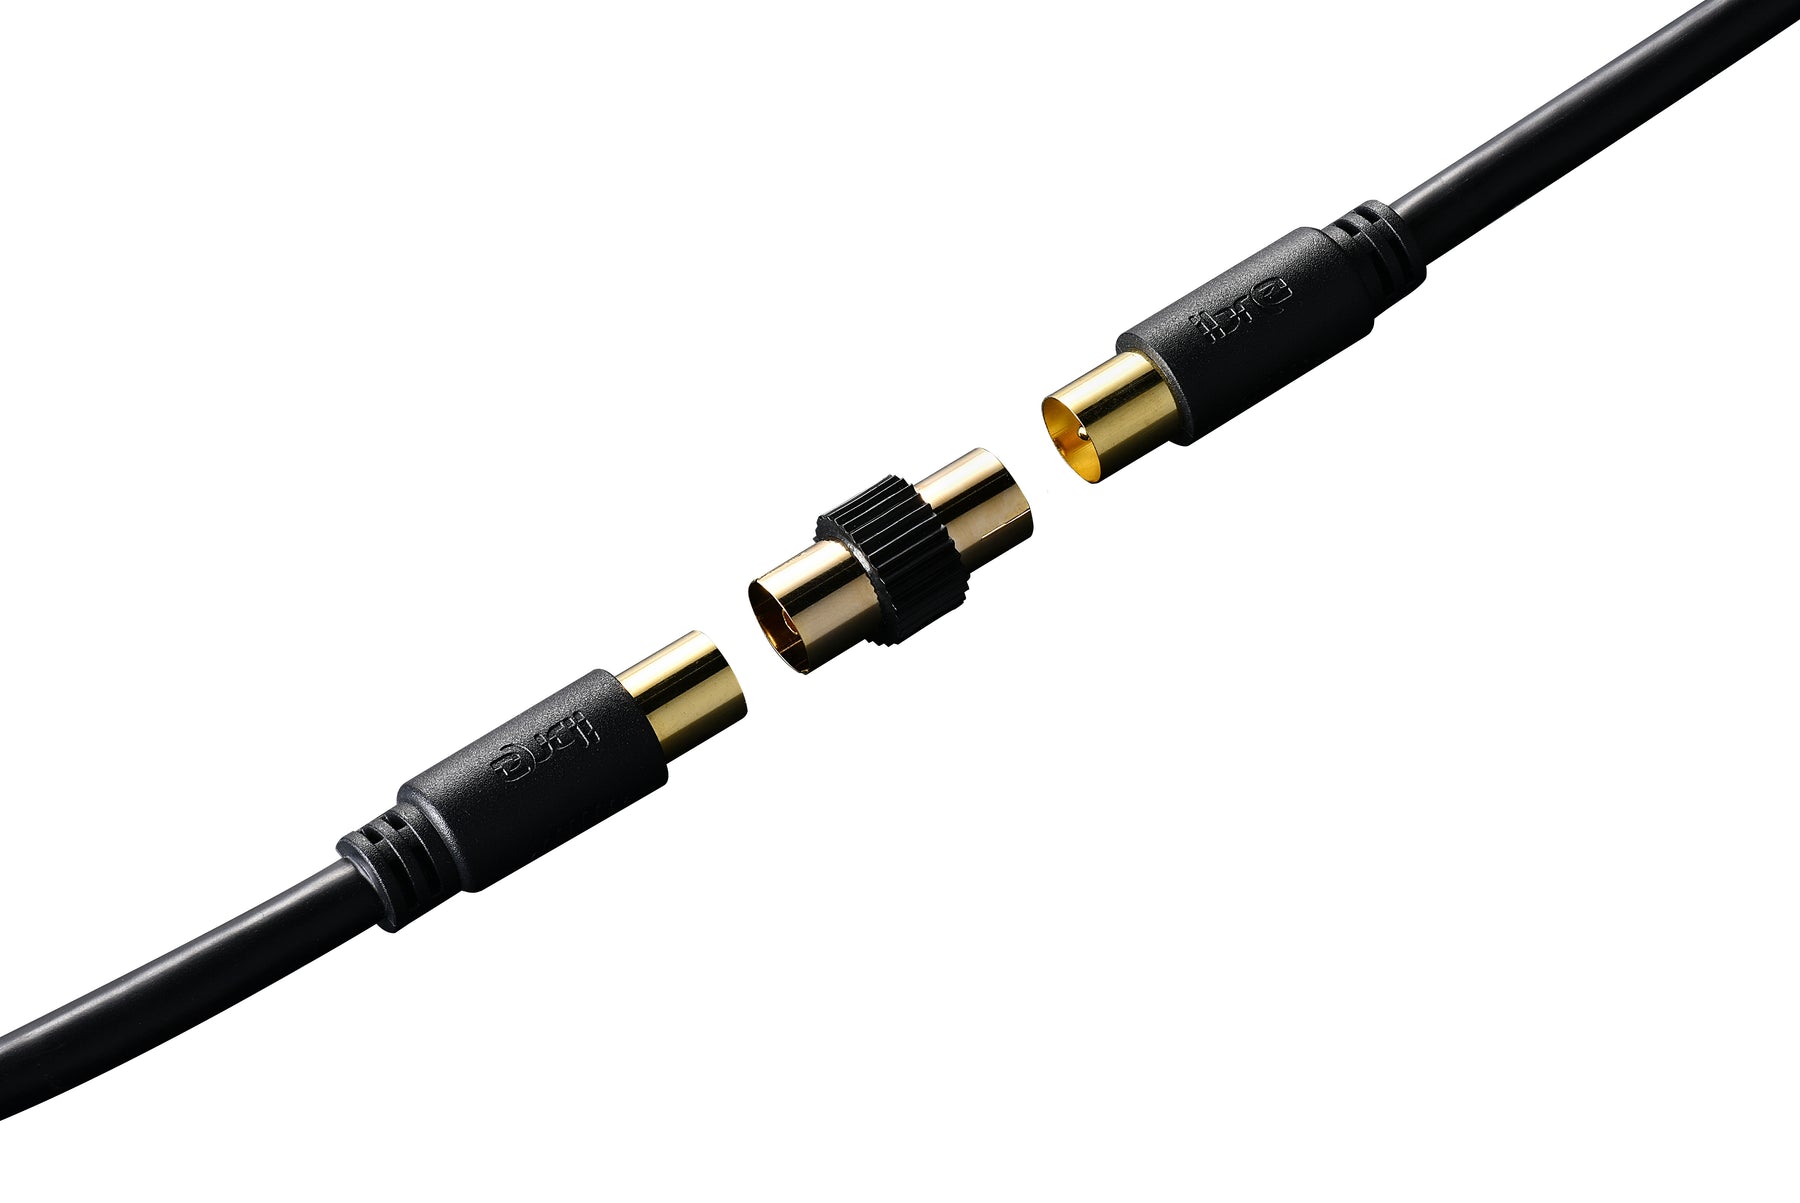 IBRA Aerial Coaxial Cable 0.75M with Gold-Plated Connectors, Male to Male RF Coax Lead with Female Adapter Coupler for Freeview, Freesat, Sky, Virgin, BT, You View, Satellite TV - Black